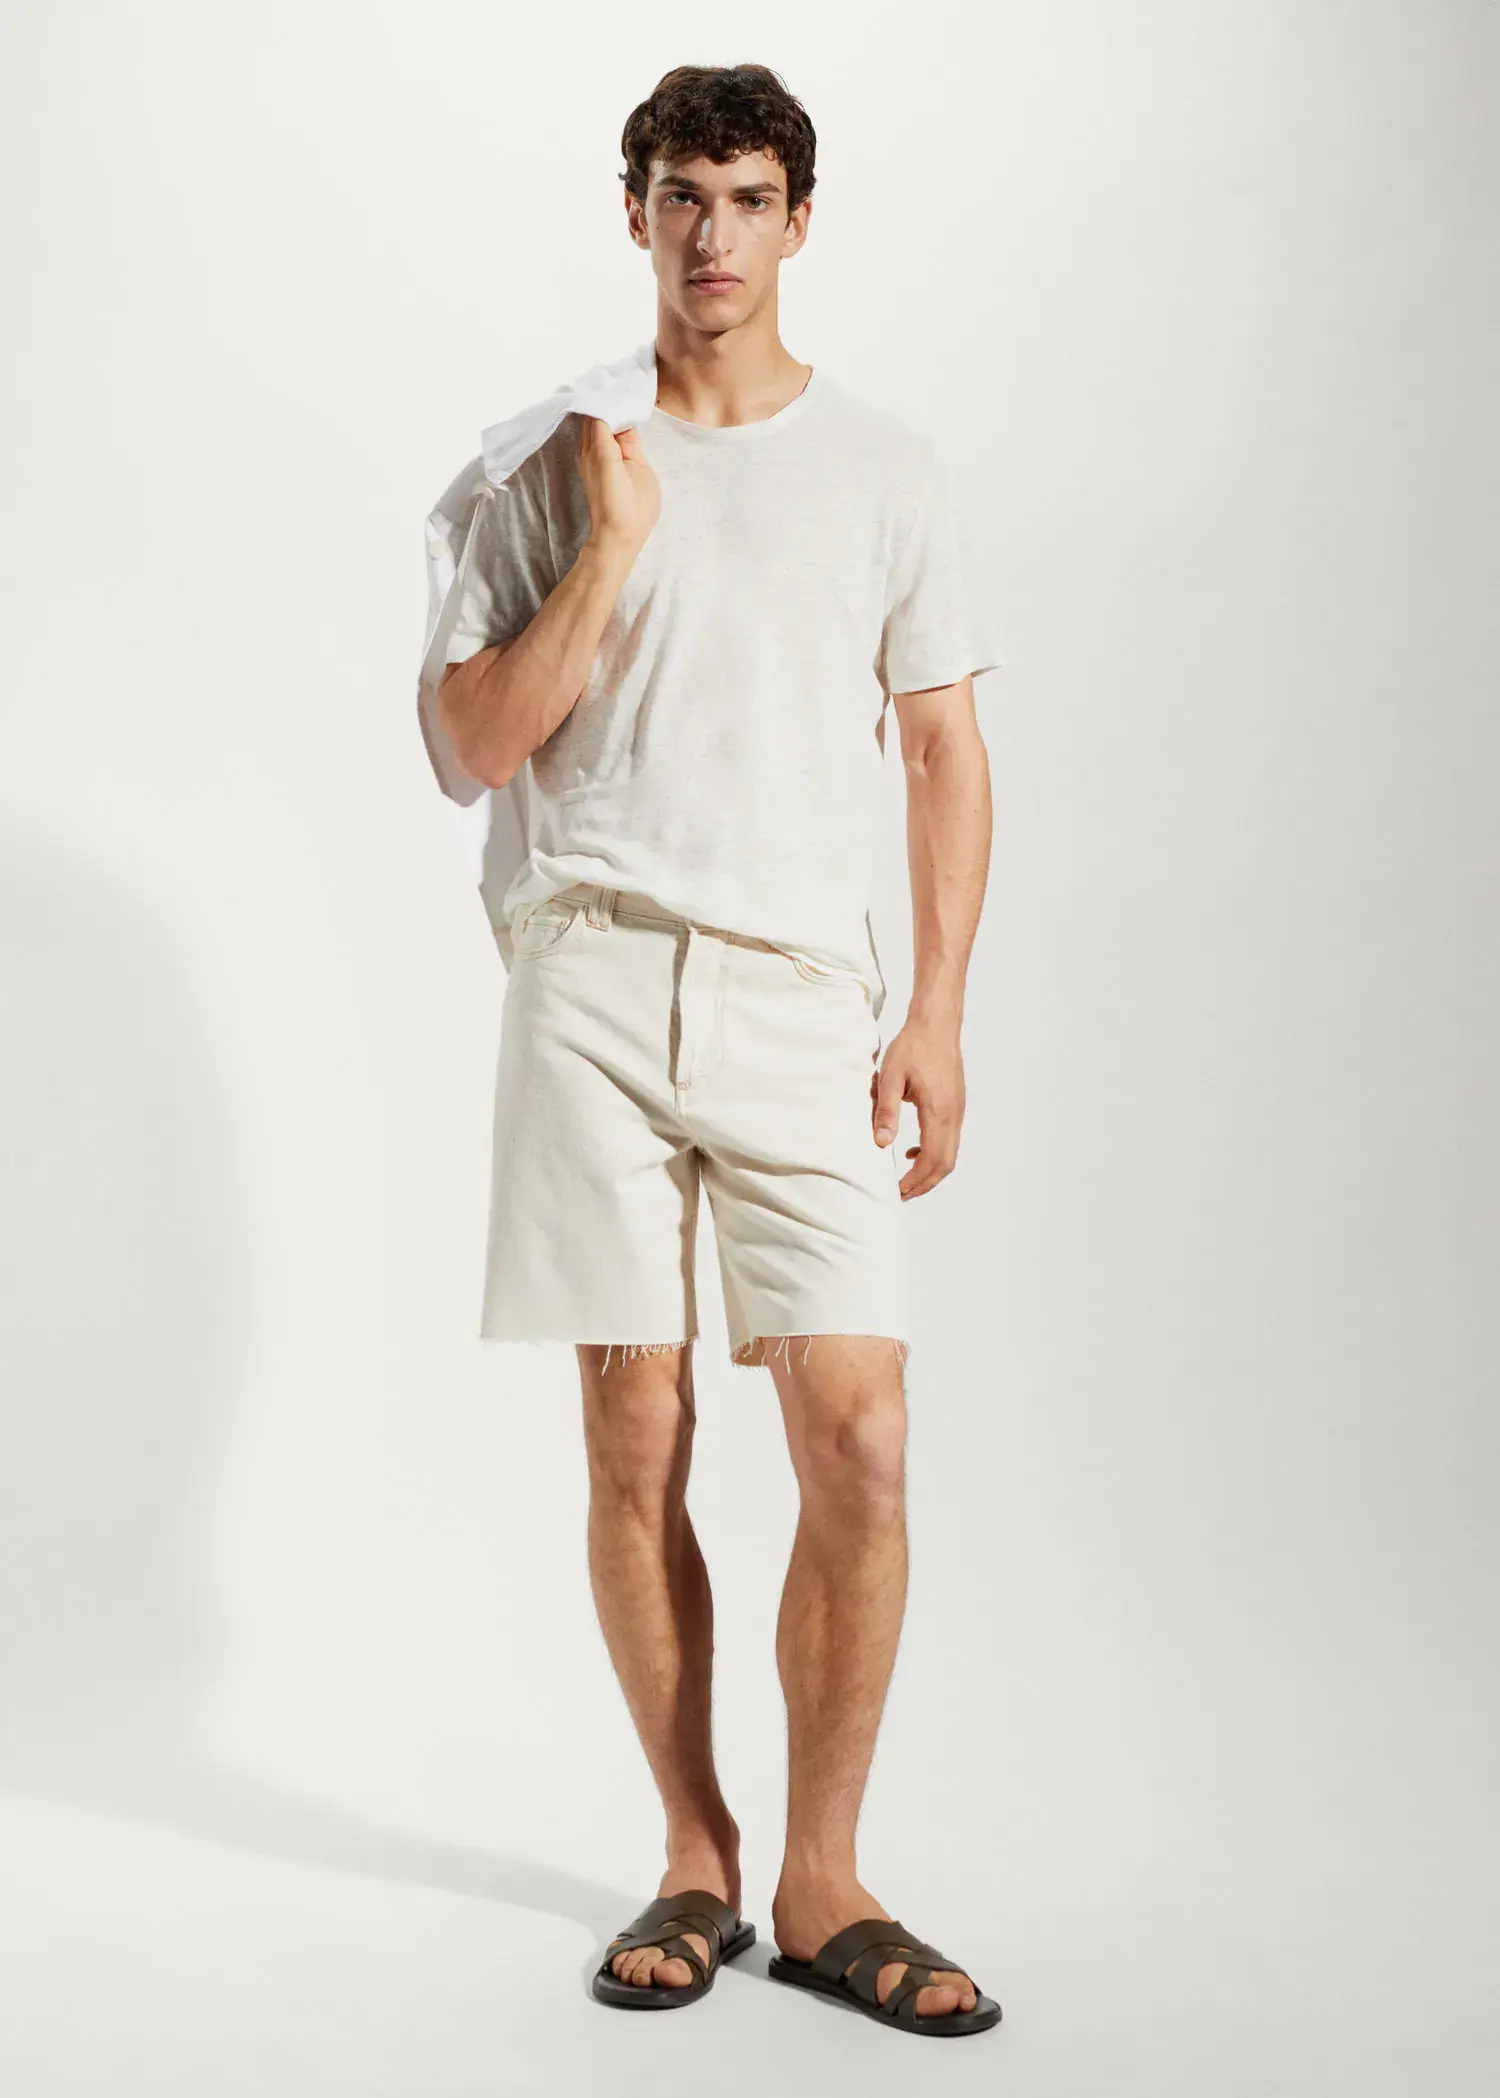 Mango 100% linen slim-fit t-shirt. a man in white shirt and shorts holding a towel. 